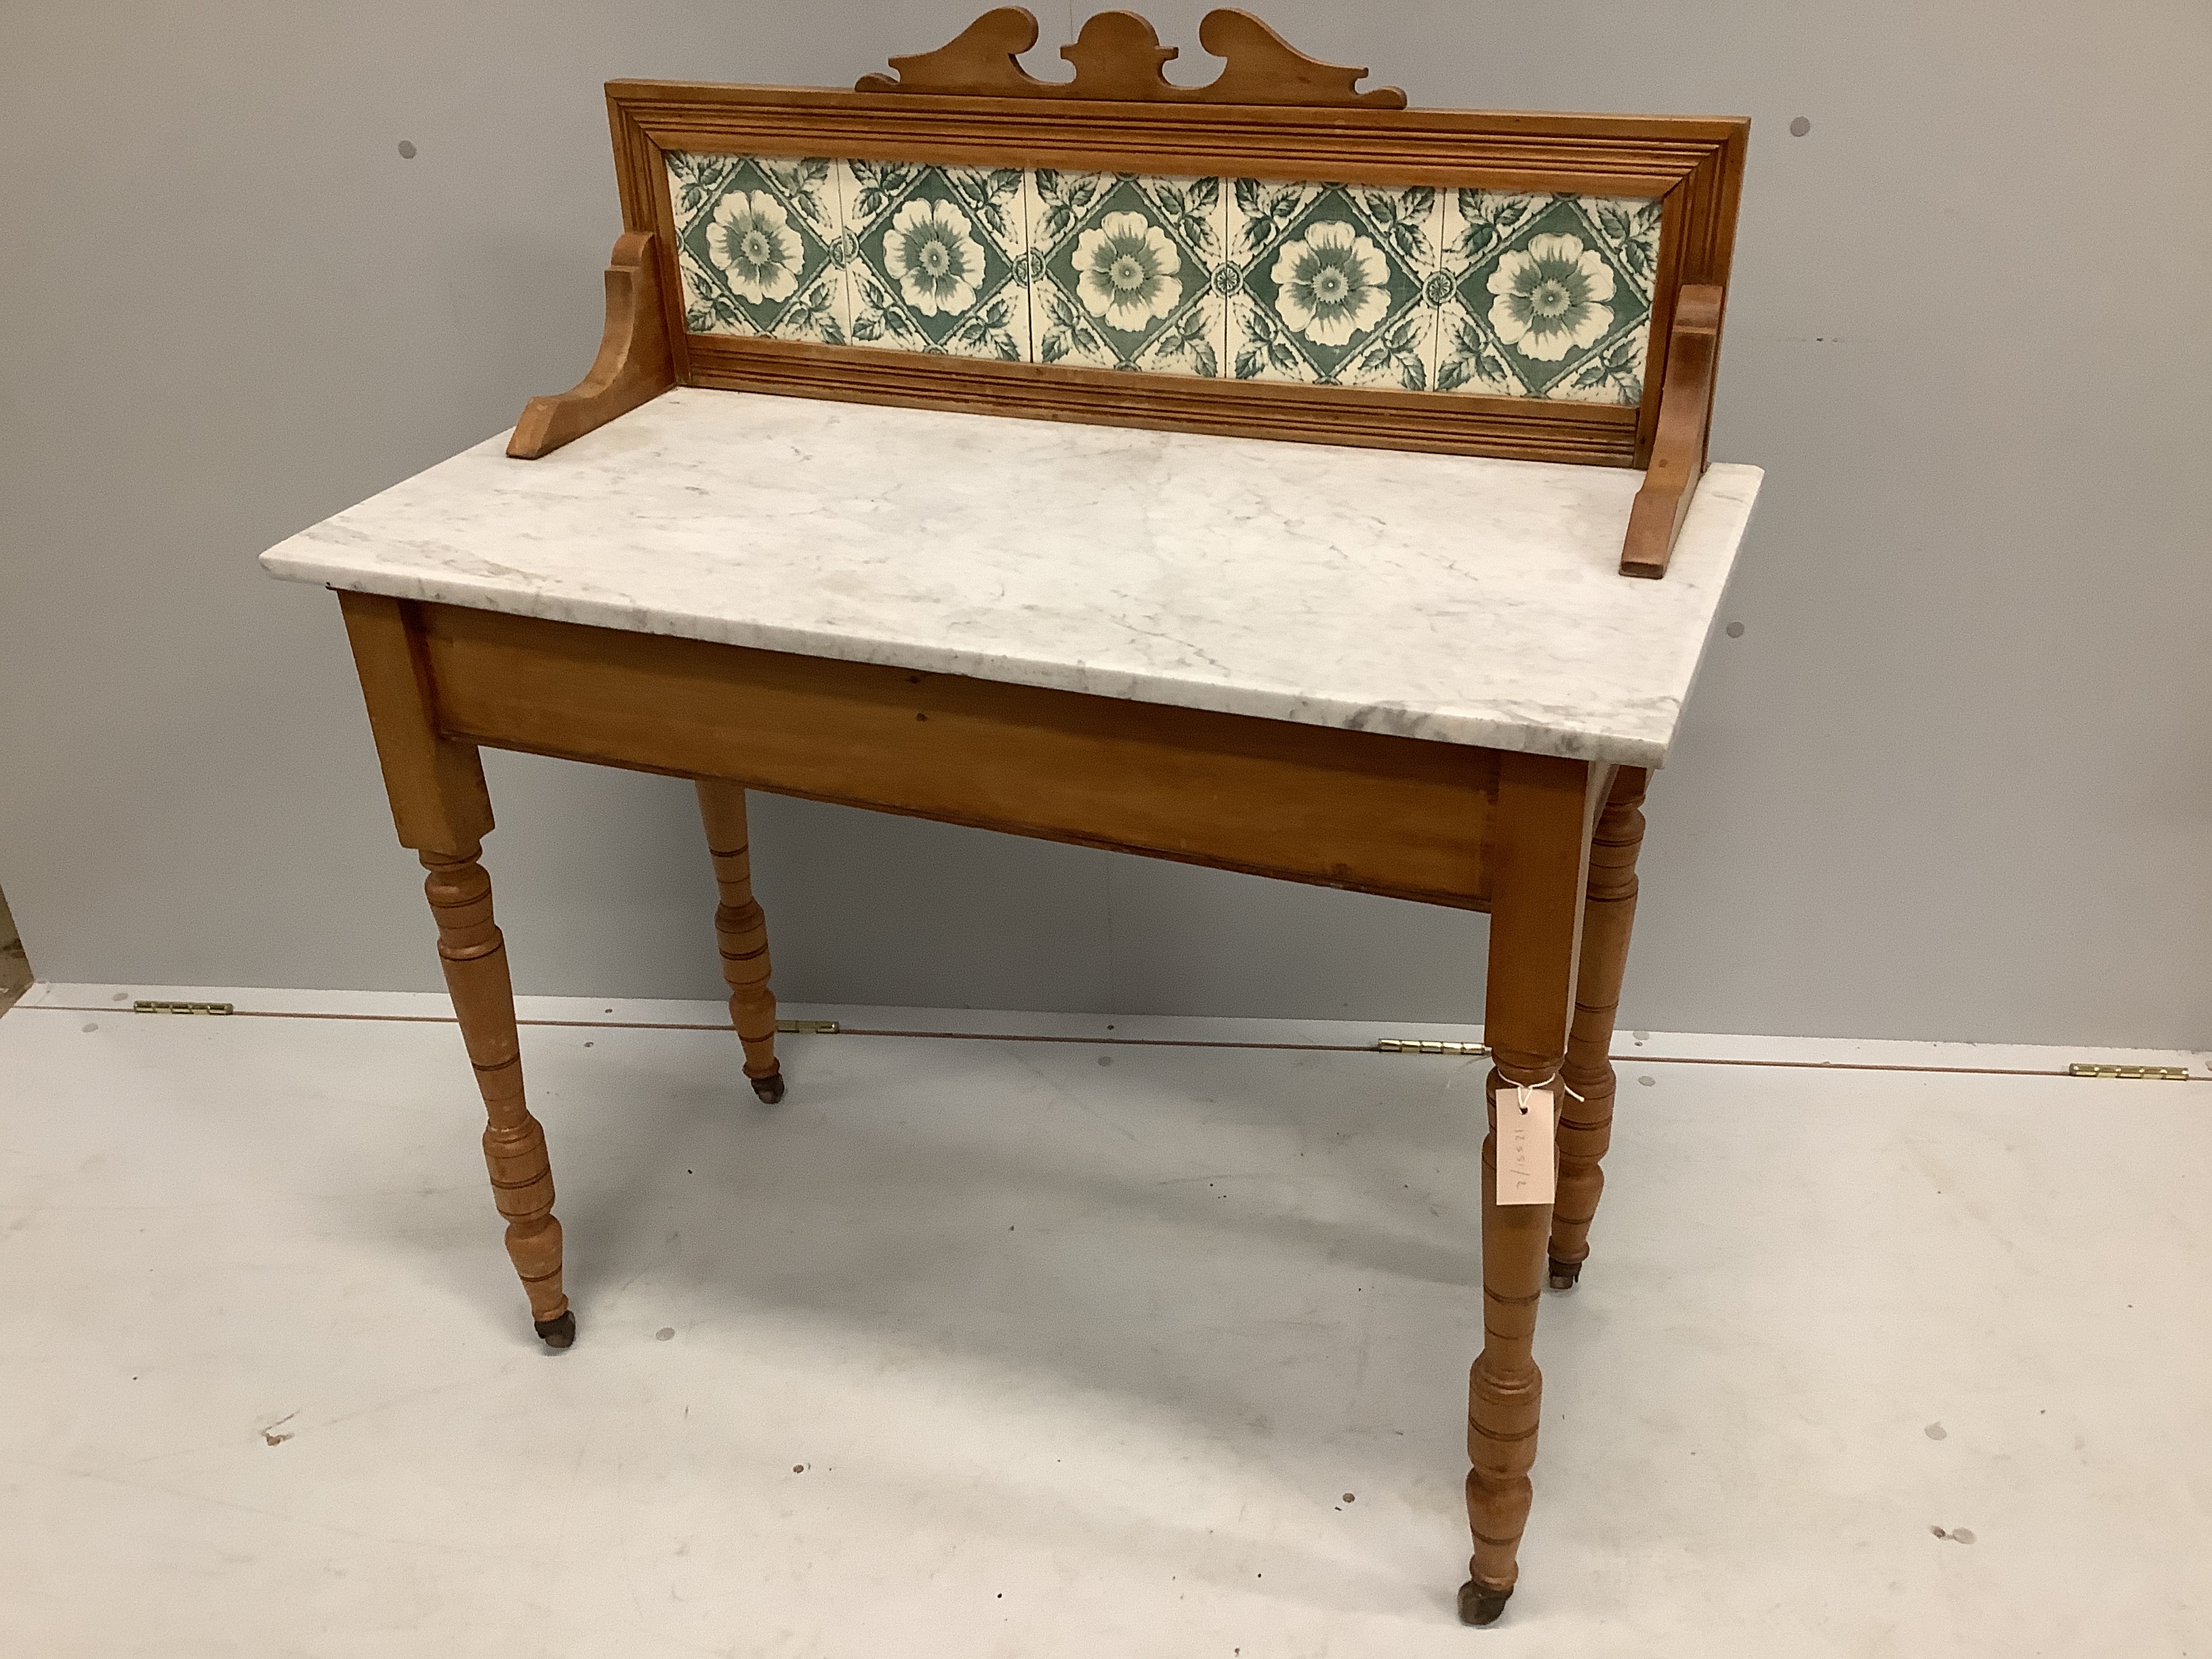 A late Victorian satin birch marble topped wash stand with tiled back, width 91cm, depth 44cm, height 102cm